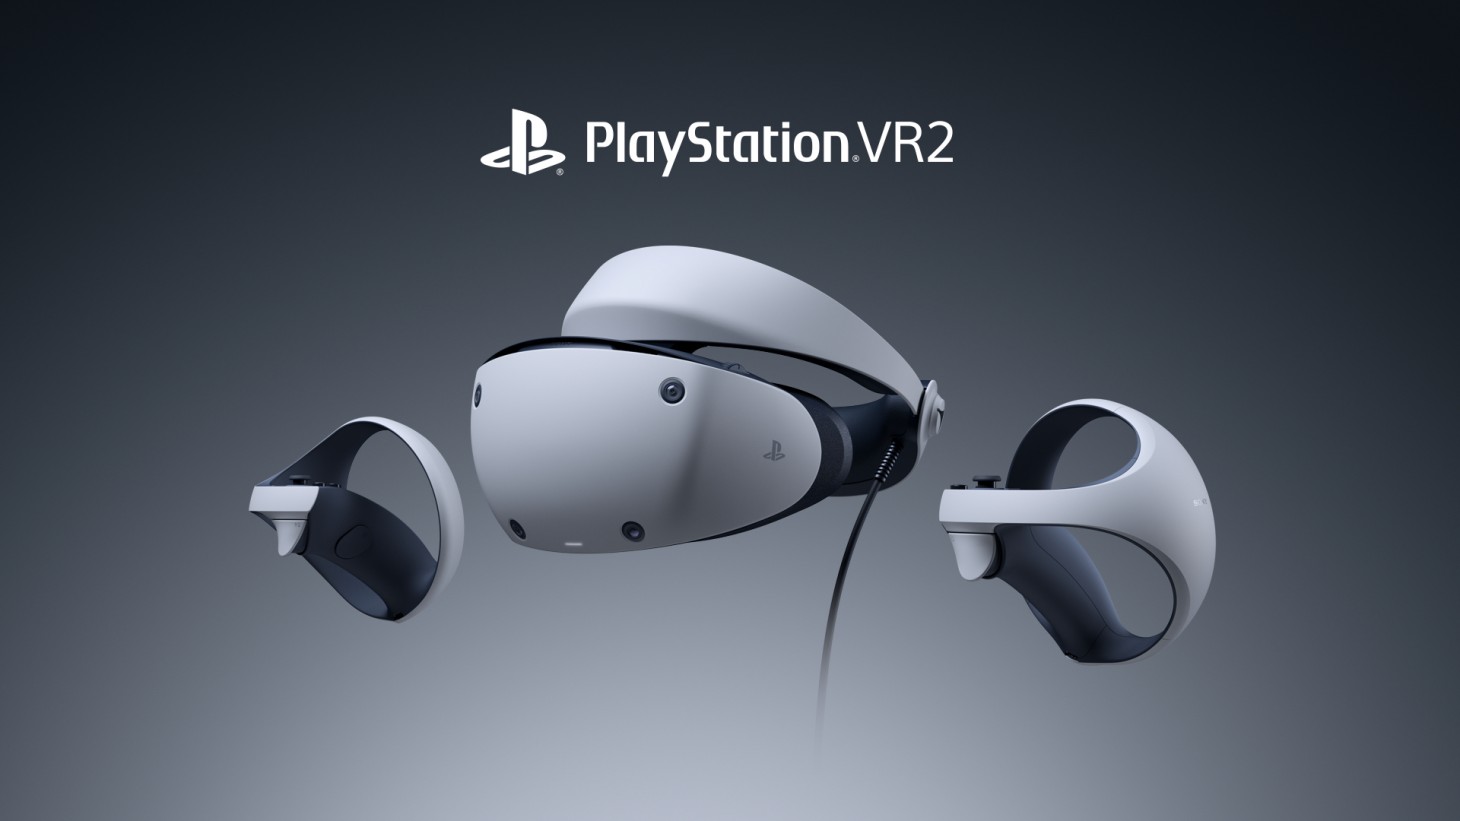 PlayStation VR 2 - The Final Hands-on Preview